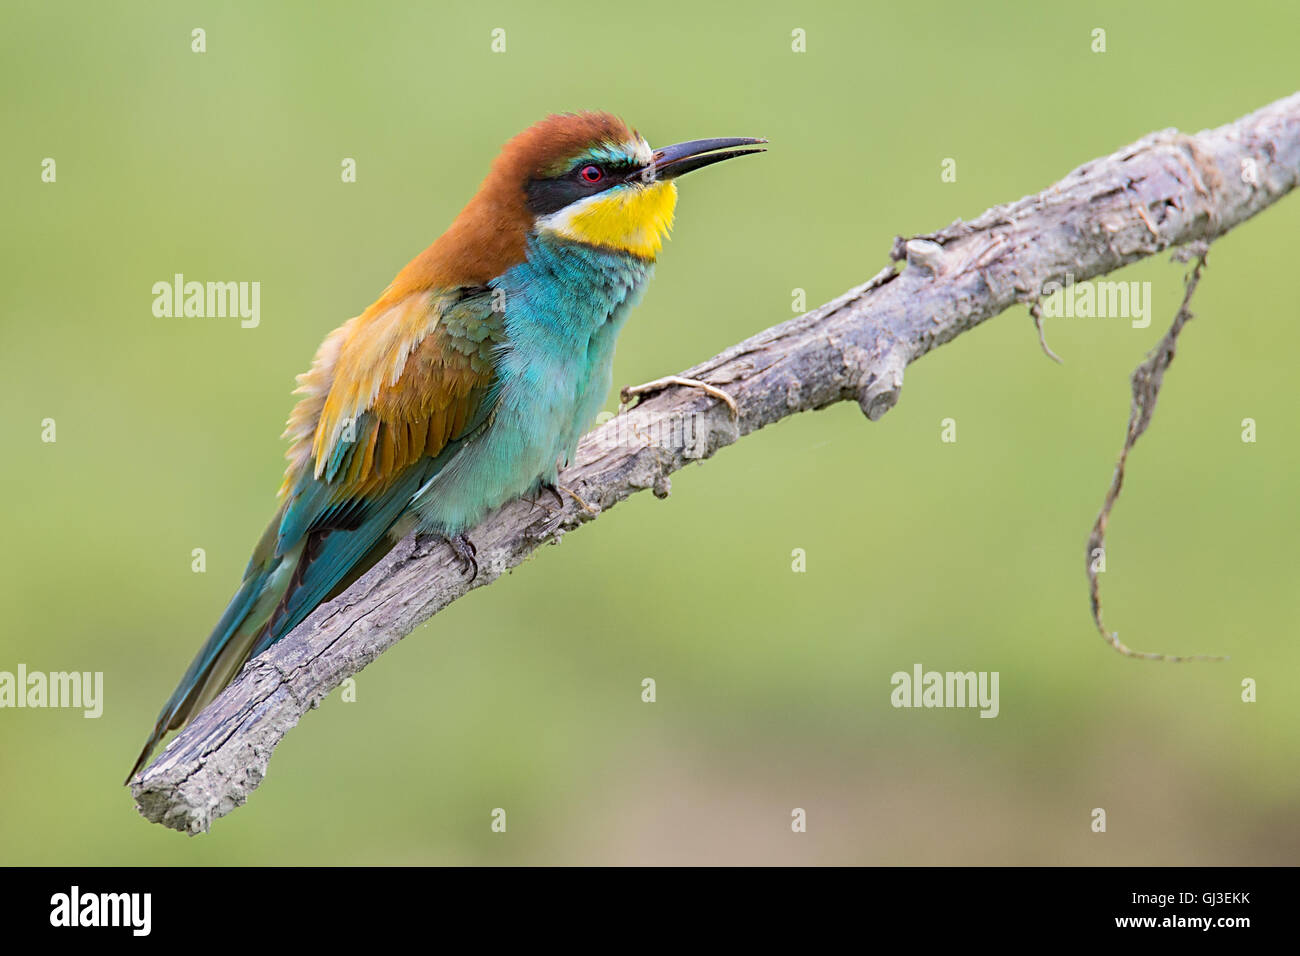 European Bee-eater (Merops apiaster) on a branch. Stock Photo